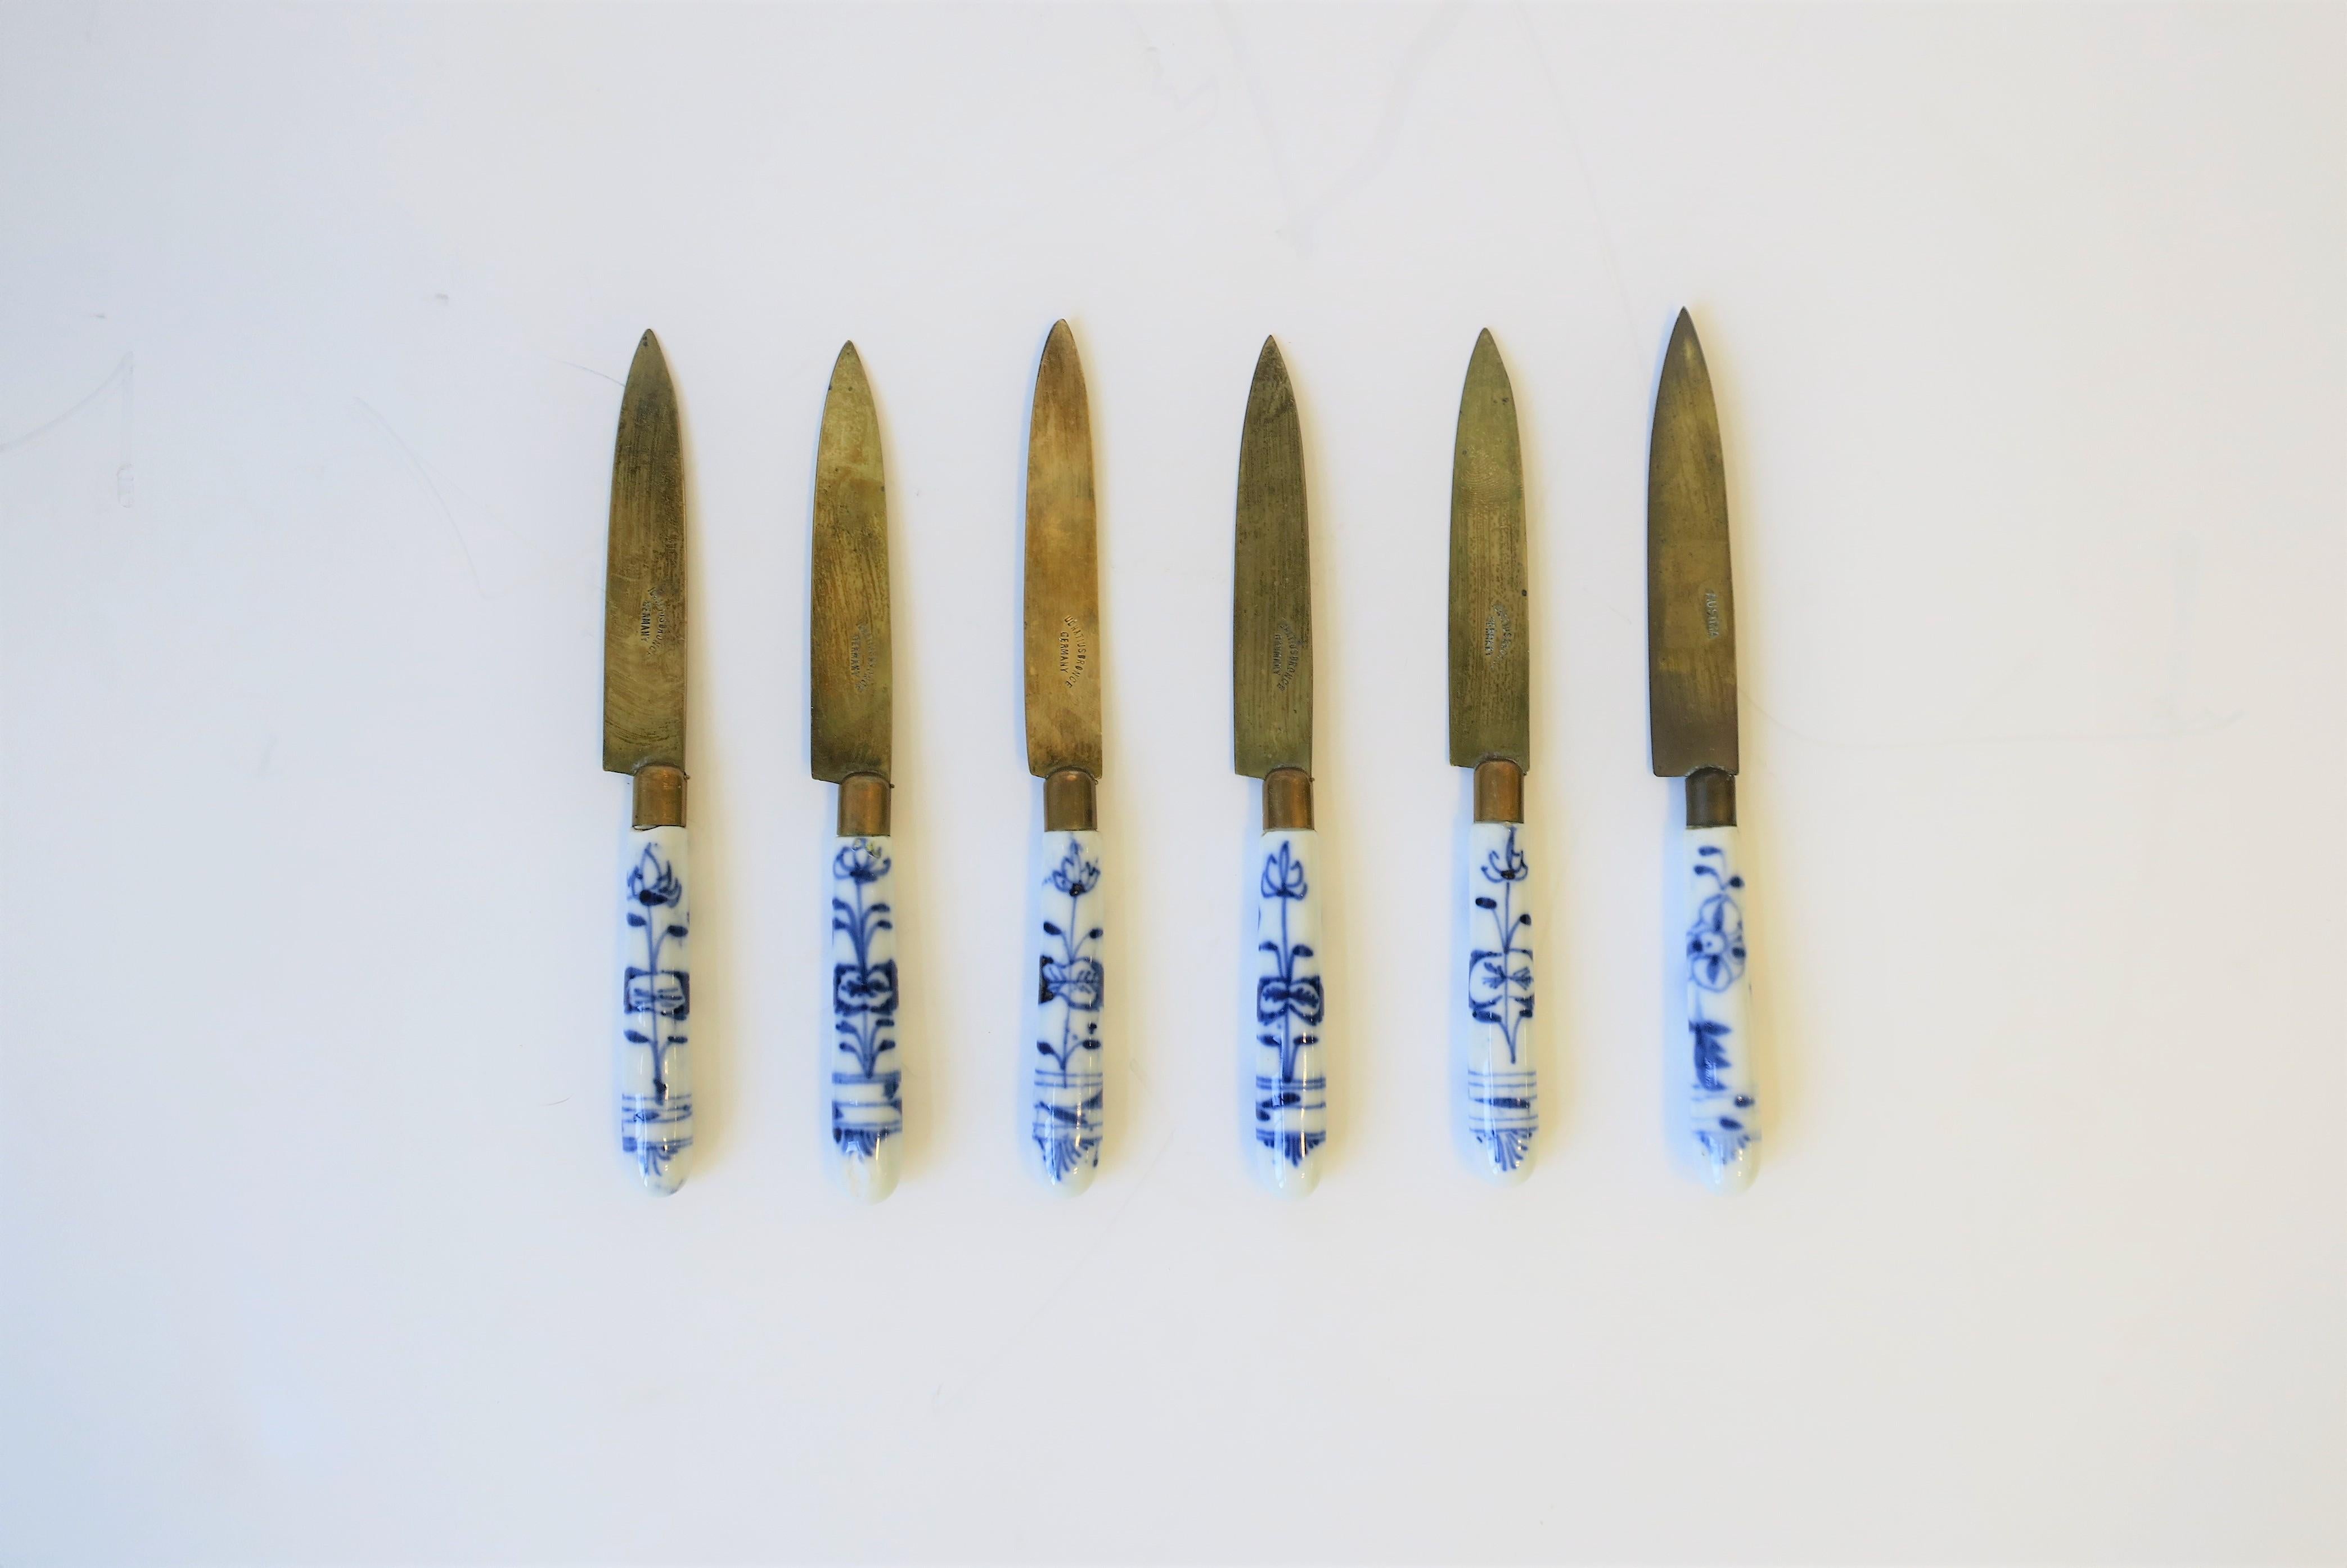 A set of six (6) German and Austrian blue and white ceramic porcelain and bronze fruit knife set, Germany, circa early 20th century or earlier. 5 knives are marked 